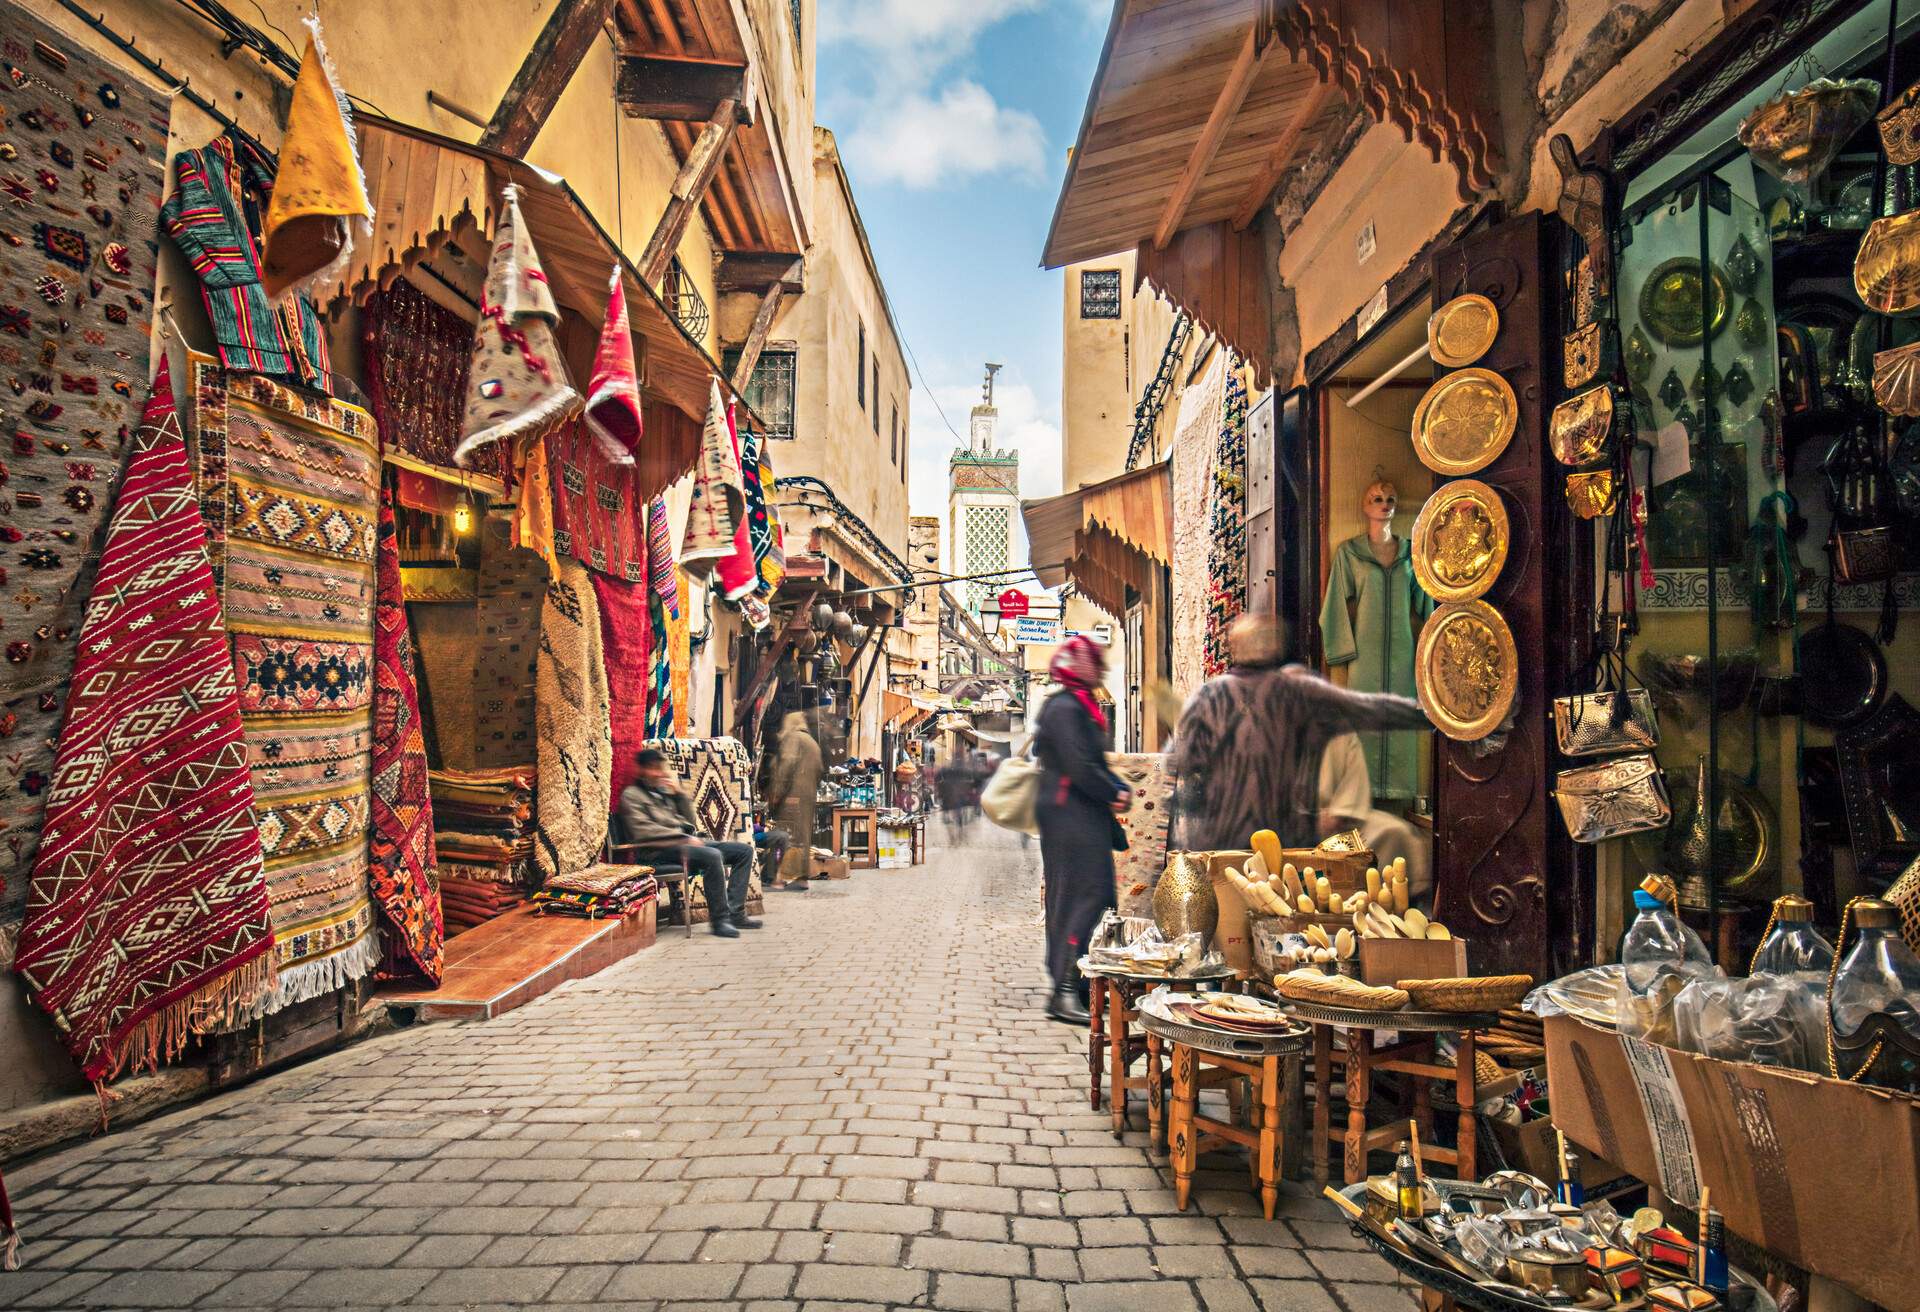 Stores in the medina streets of Fez, Morocco.